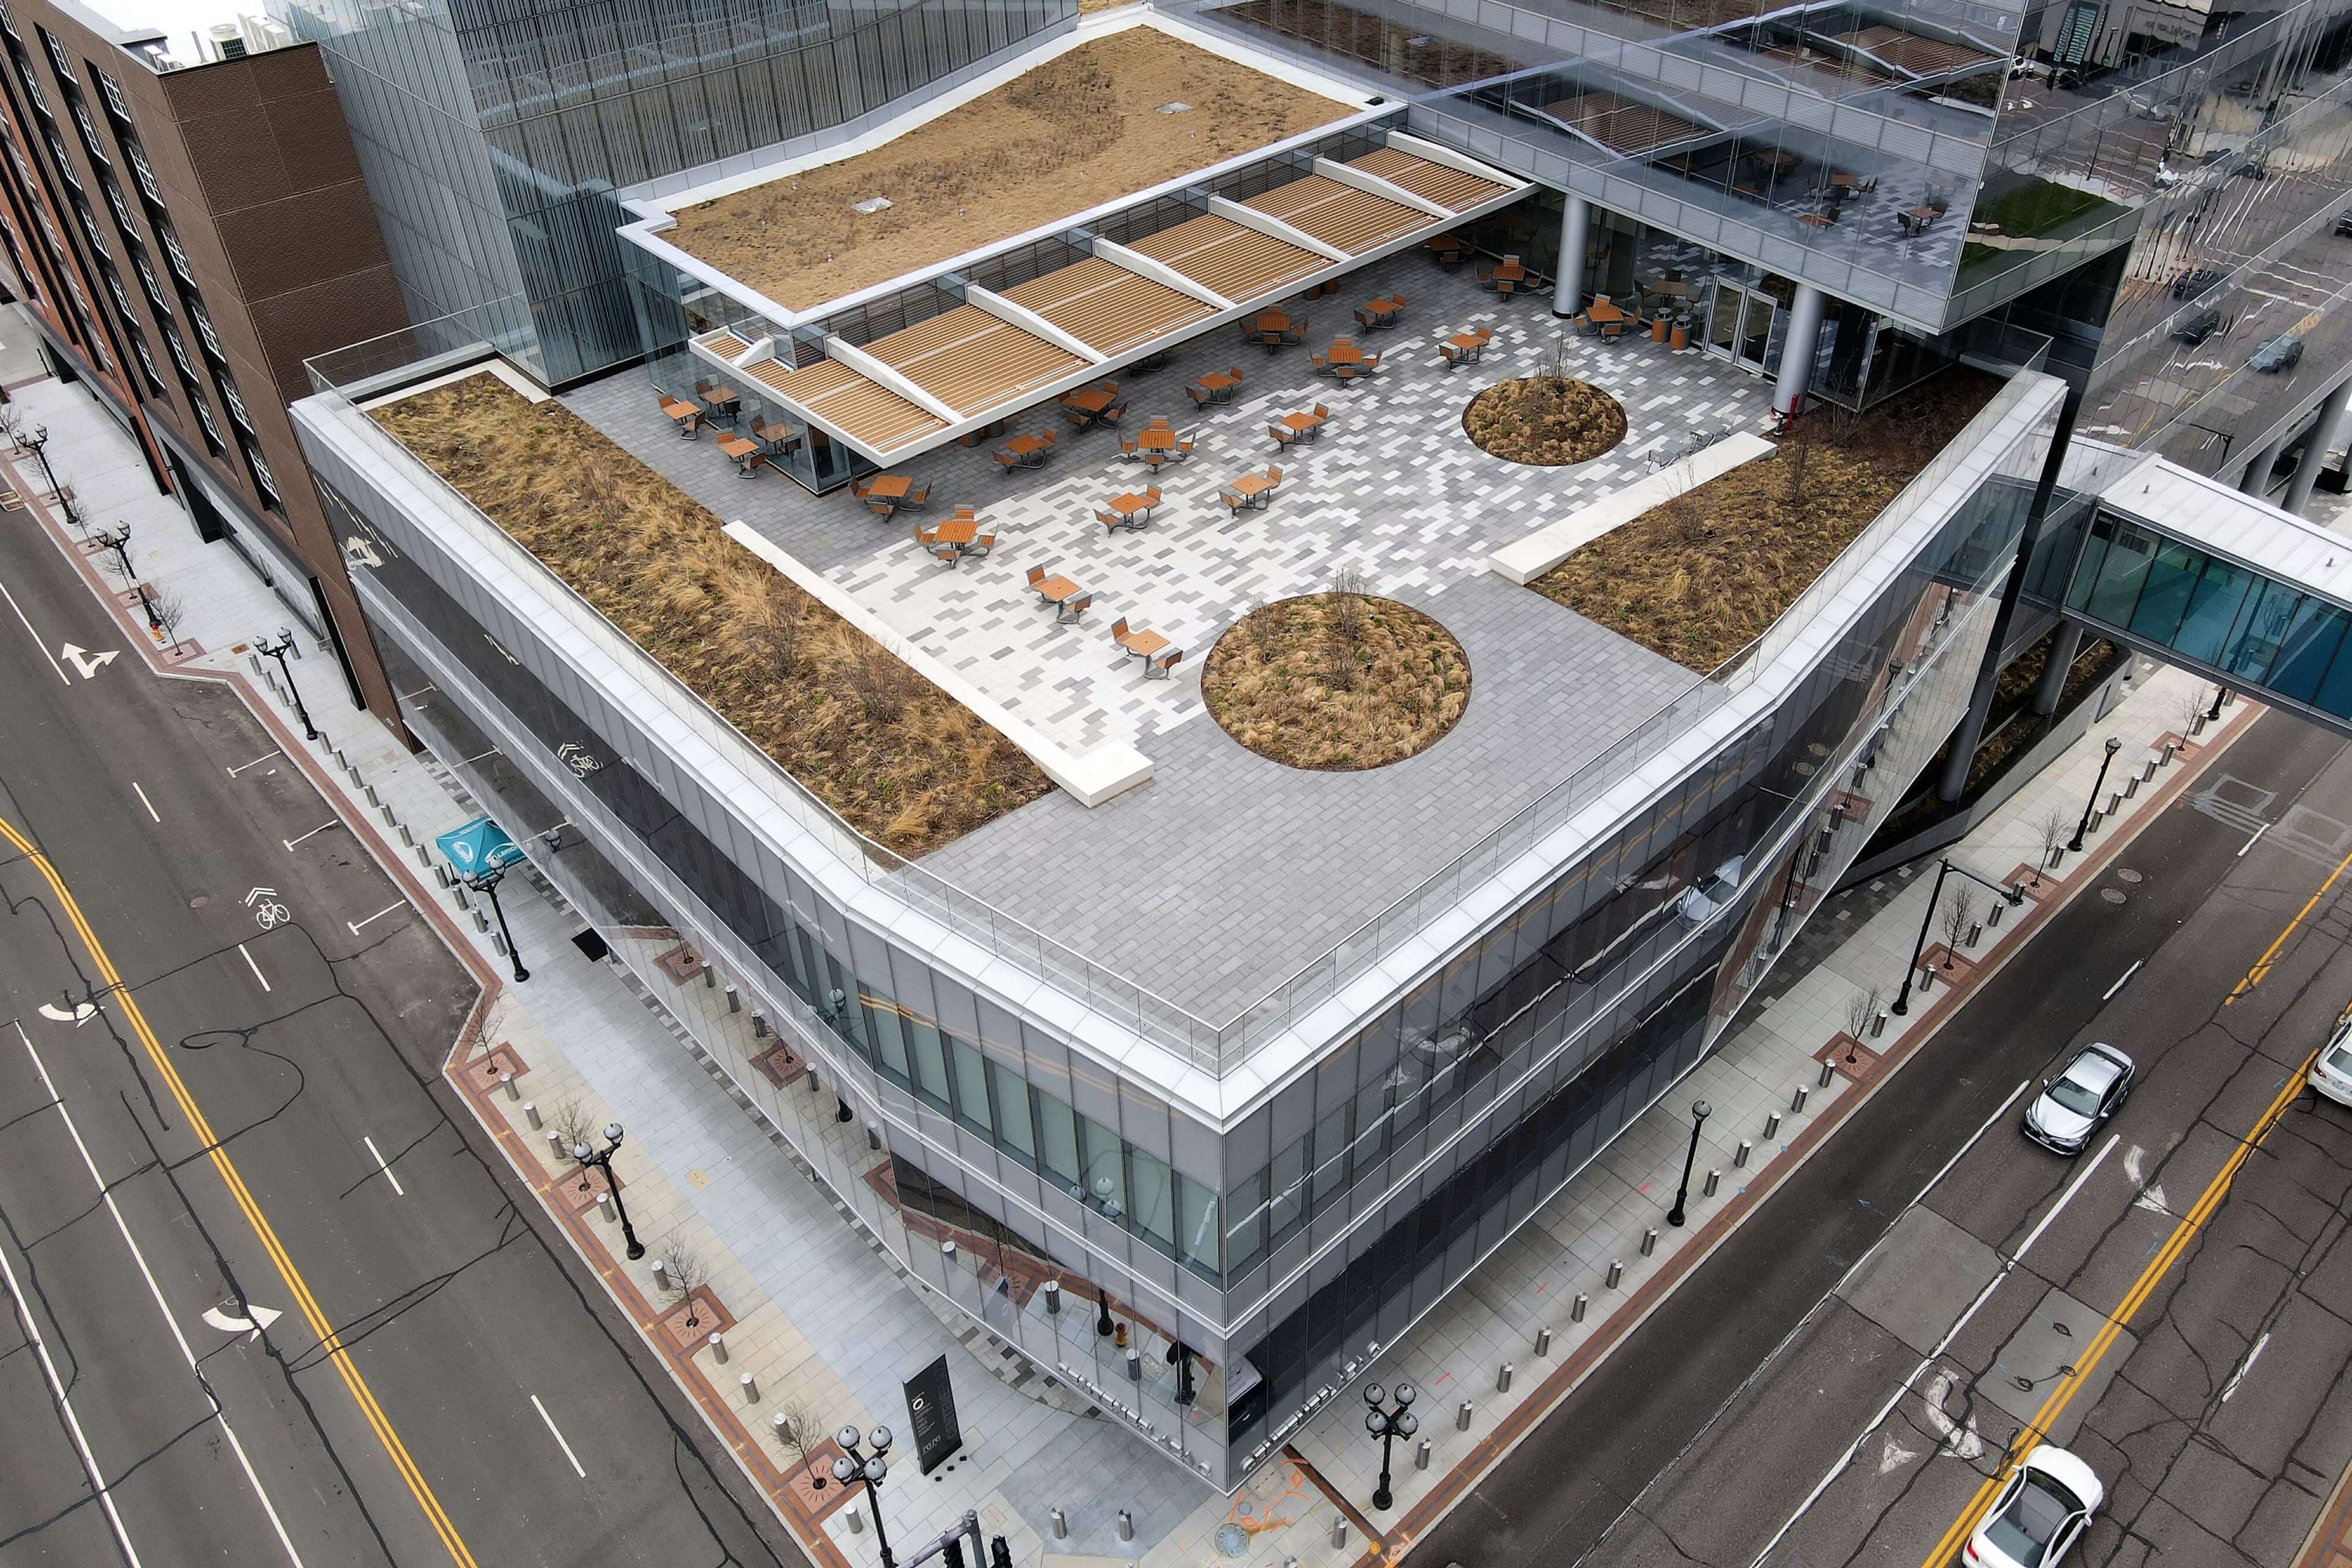 Aerial view of the lower Centene Plaza building with a green roof and sitting area for people to enjoy